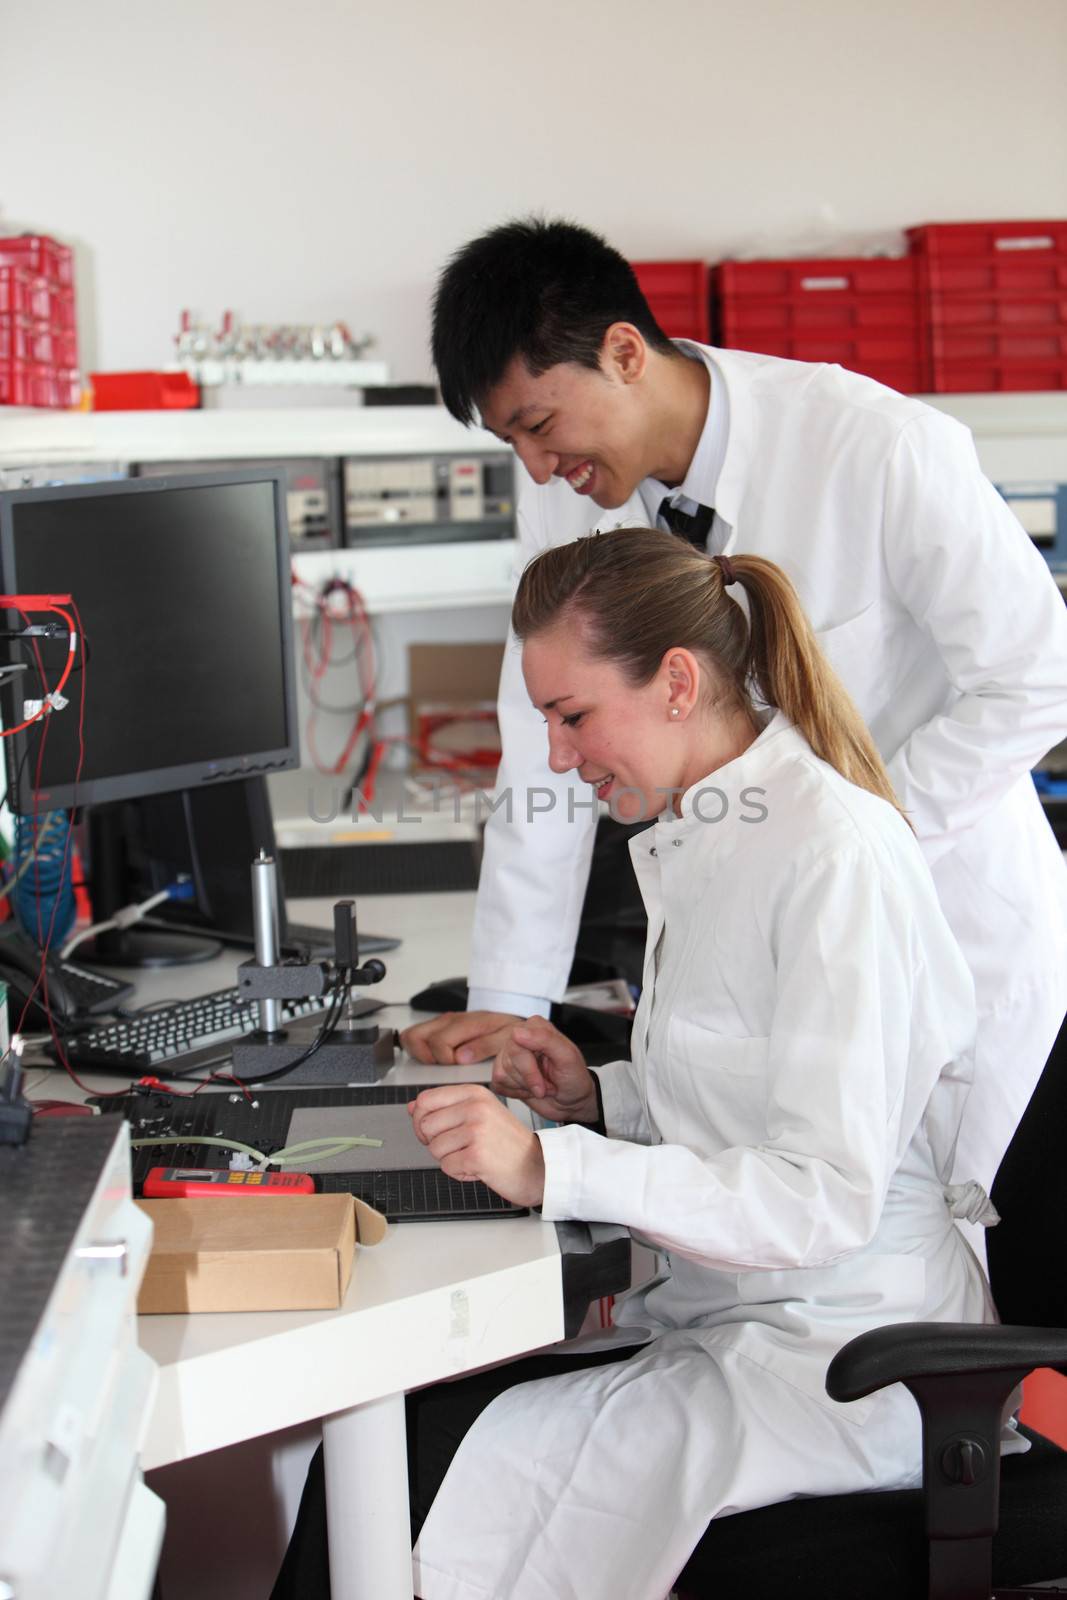 Two laboratory technologists at work, a young Asian man and his female colleague, standing over a piece of equipment waiting for a test to complete